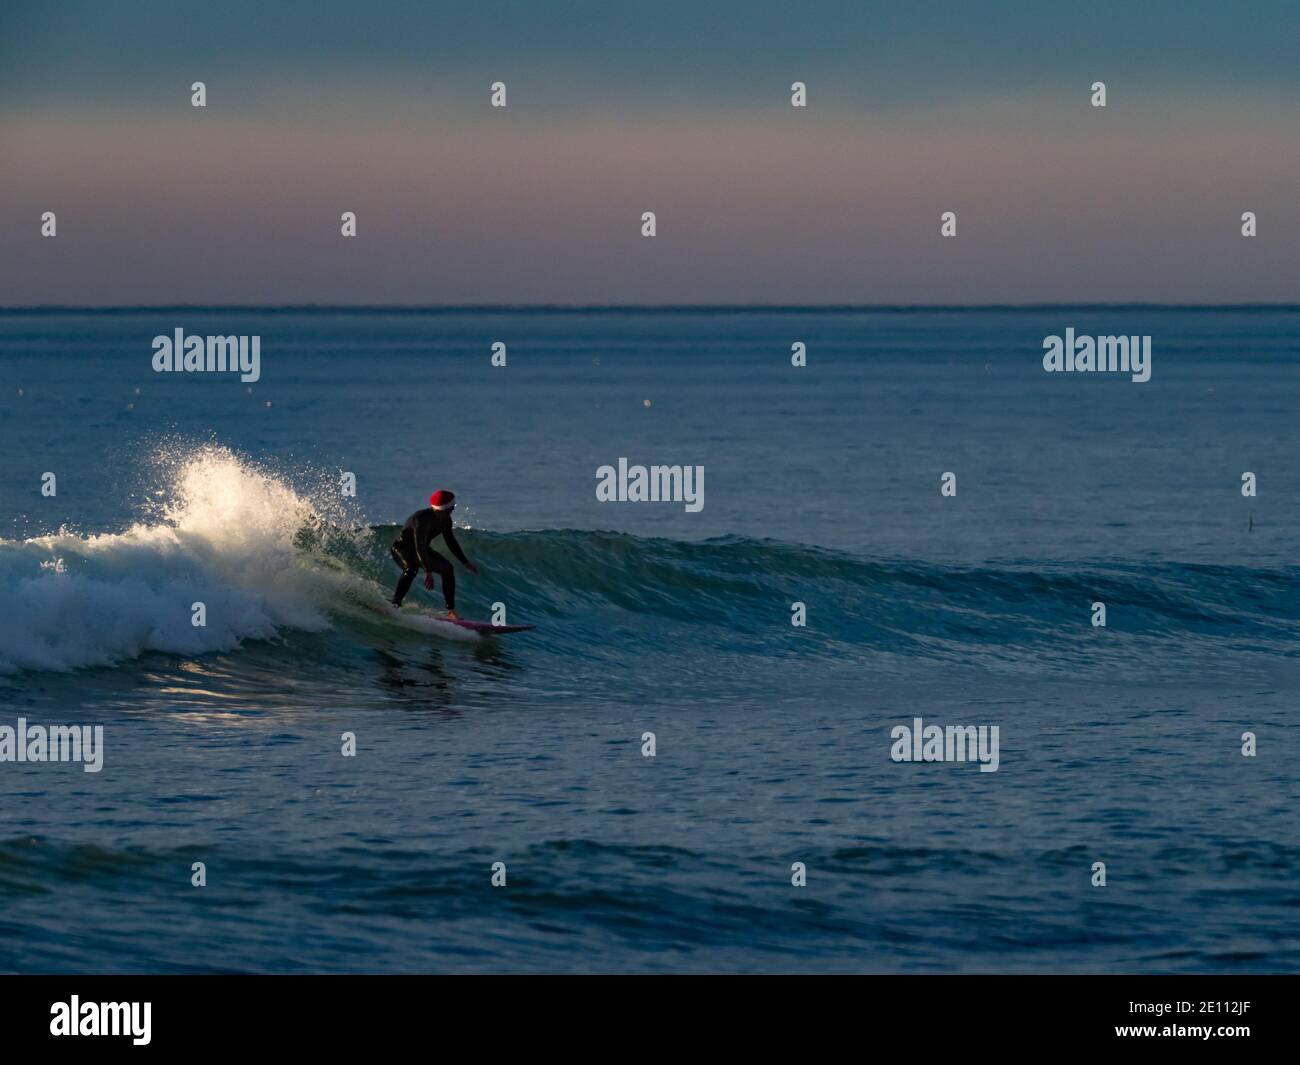 Santa surfing the waves off Mission Beach, San Diego, California at Christmas Stock Photo